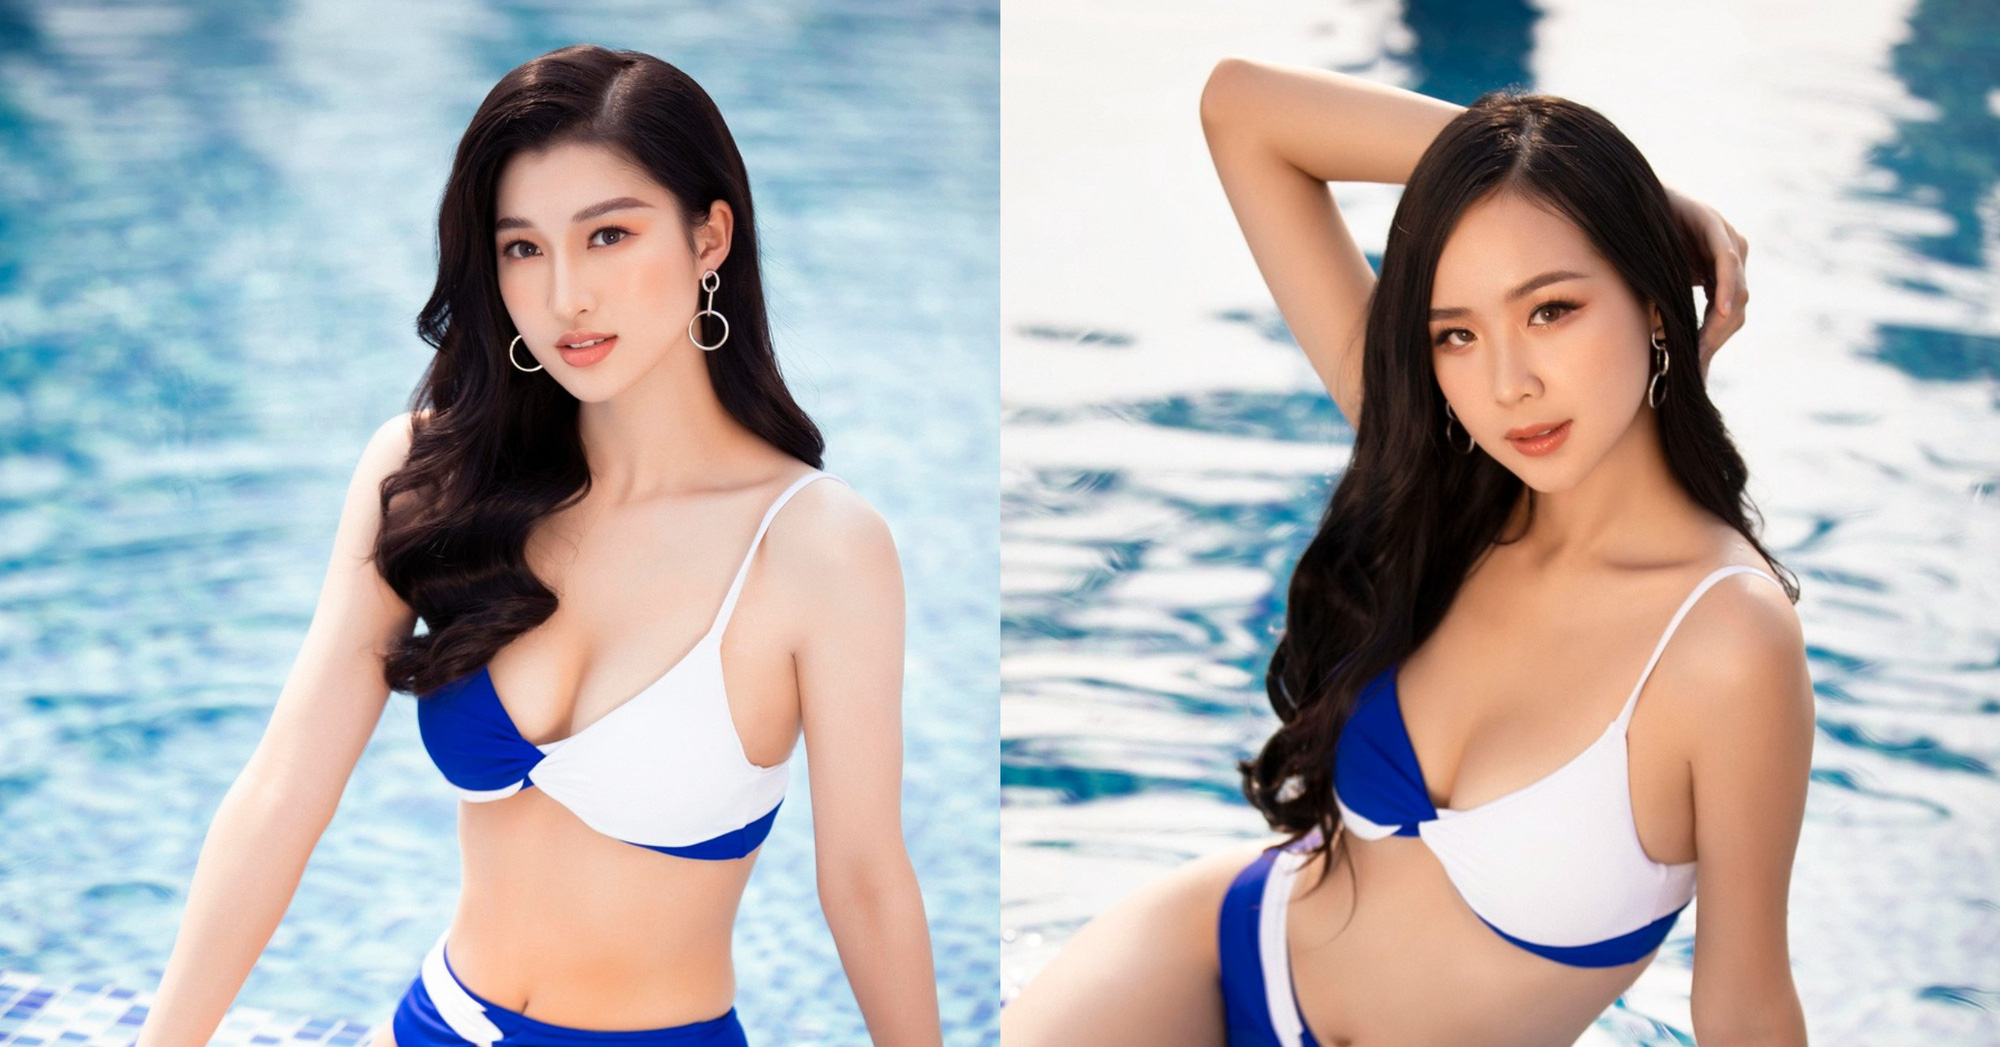 The final round of Miss World Vietnam 2022 is about to take place, who are the 9 outstanding contestants?